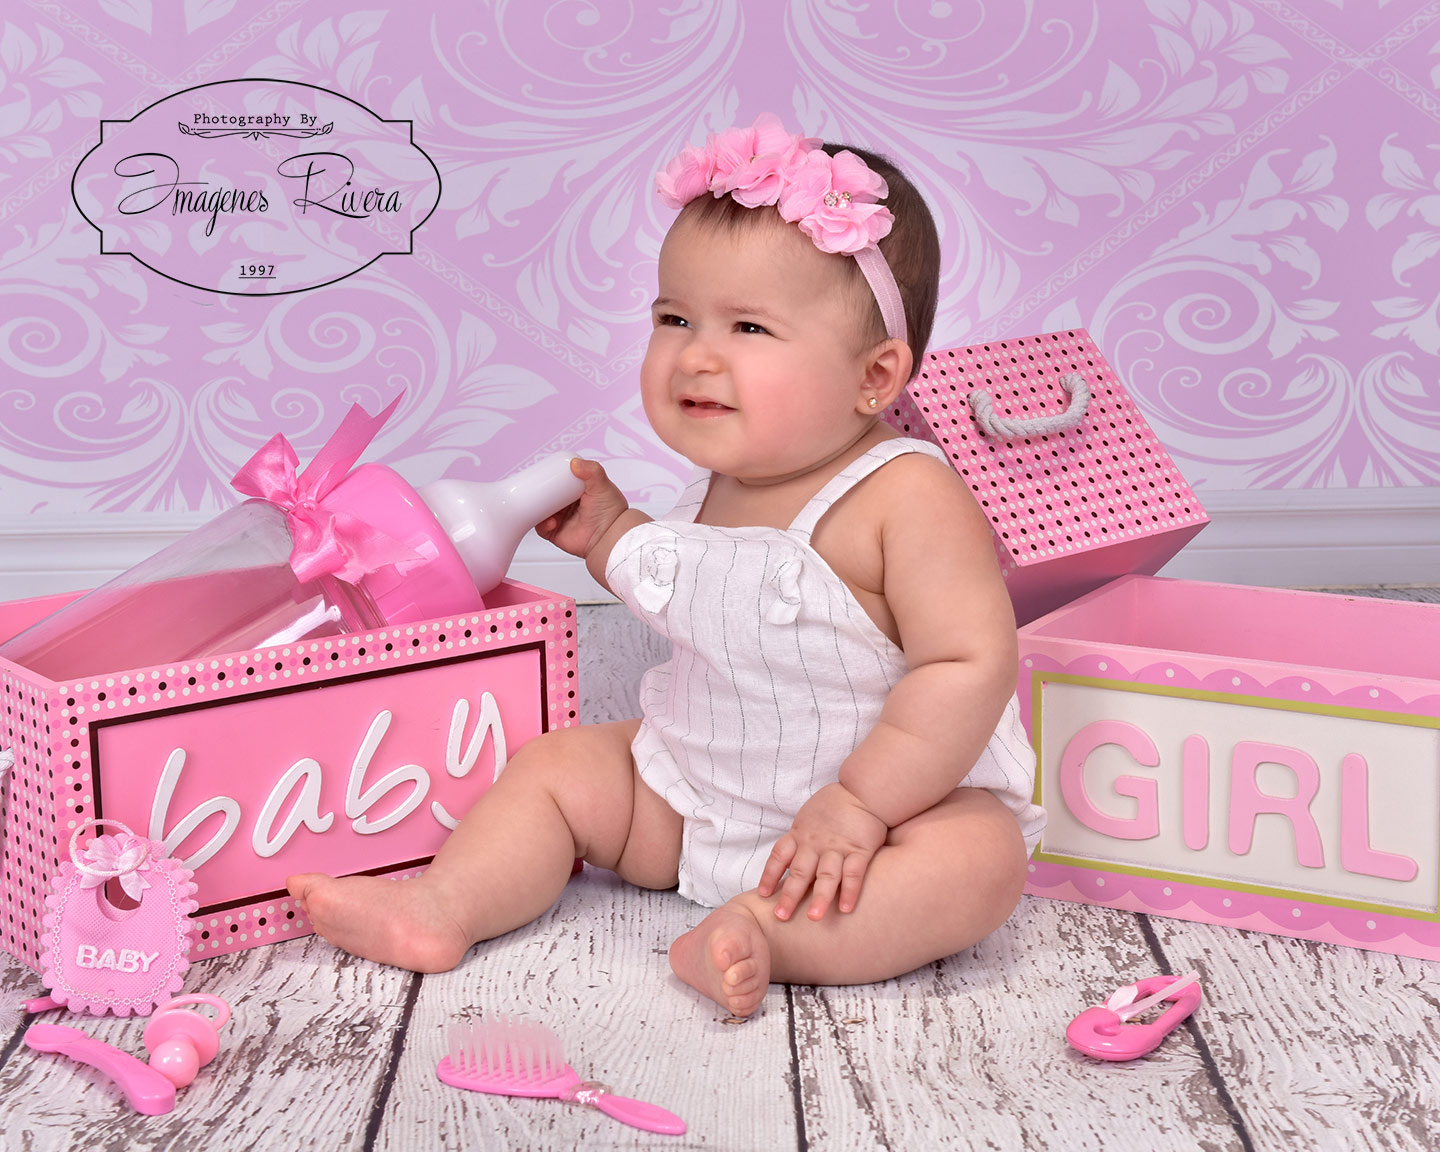 ♥ Nathaly´s 6 months | Children photography Miami Imagenes Rivera ♥